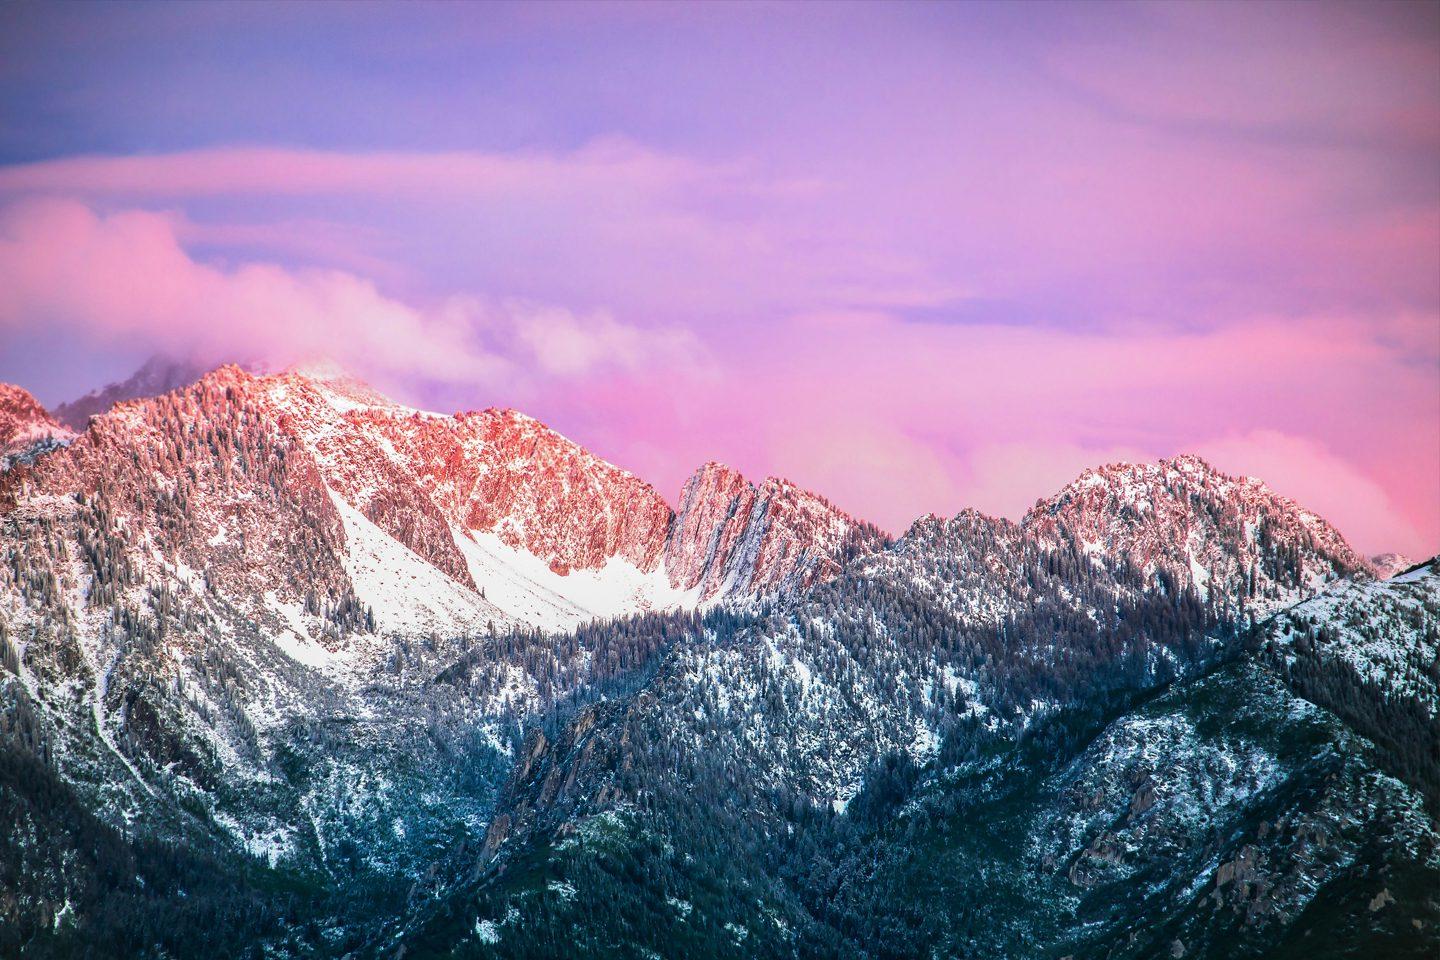 Rocky Mountain sunset pink clouds over snowy rugged peaks